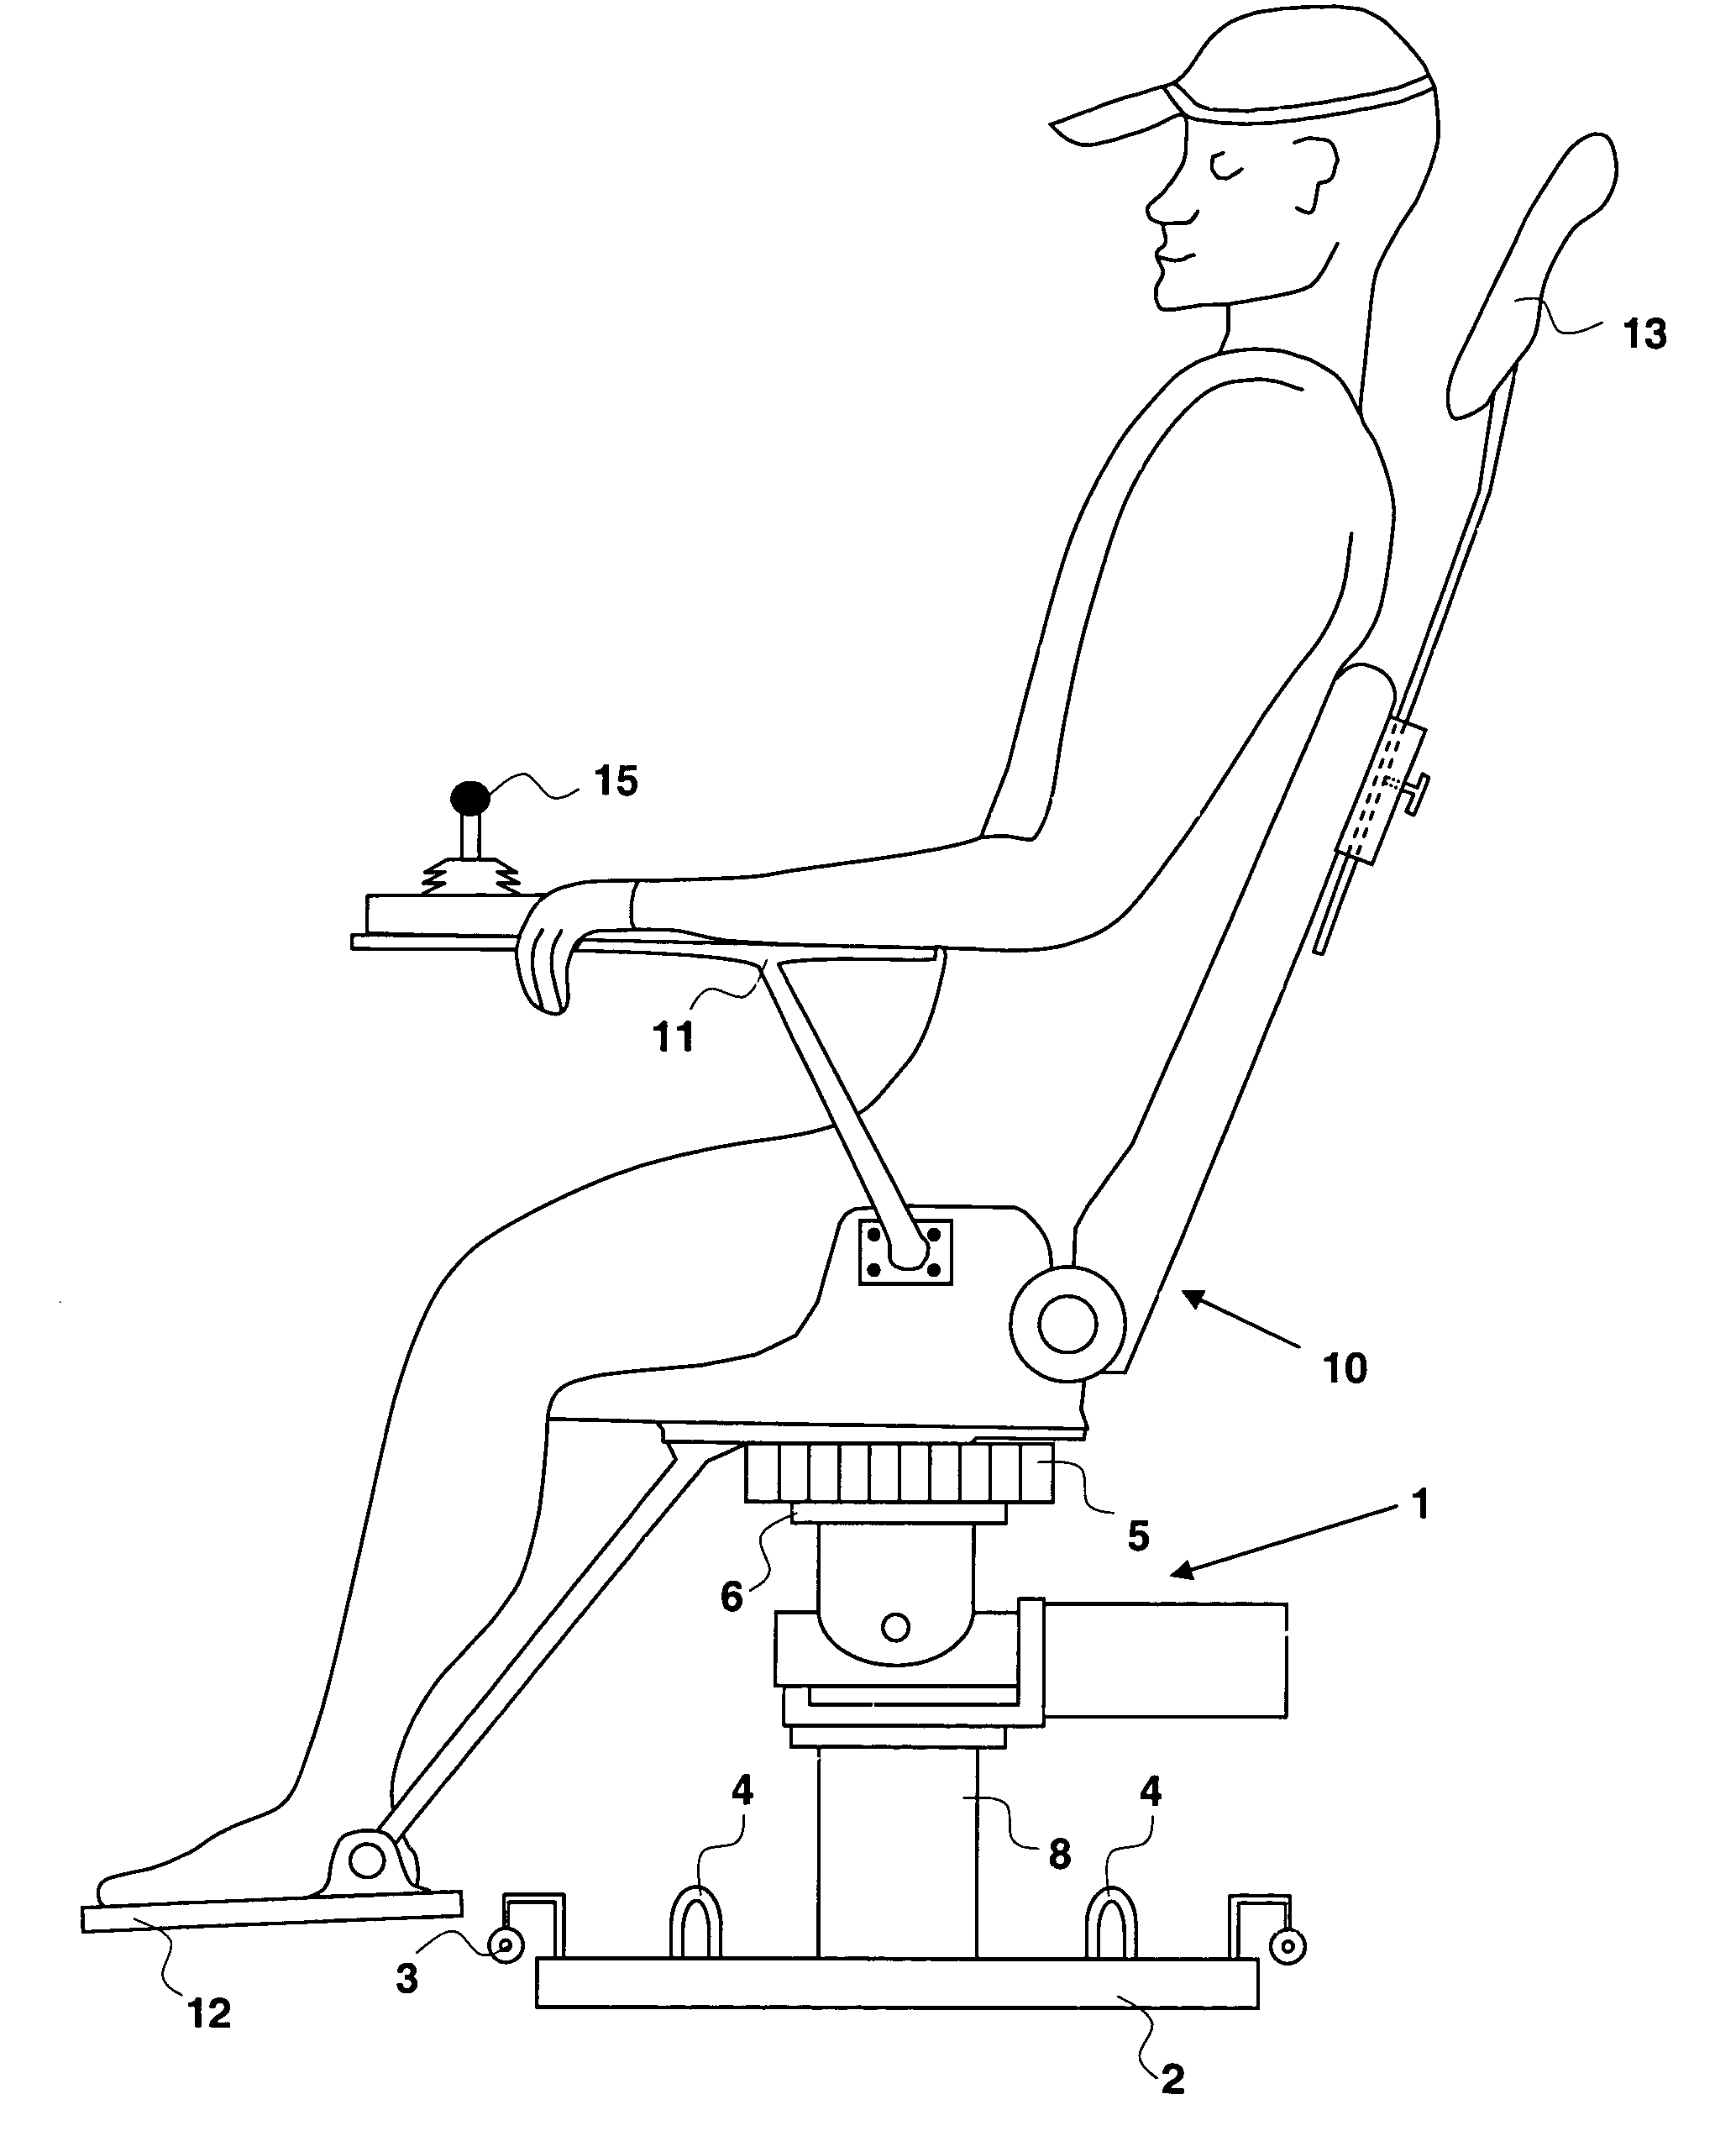 Autonomous, self leveling, self correcting anti-motion sickness chair, bed and table